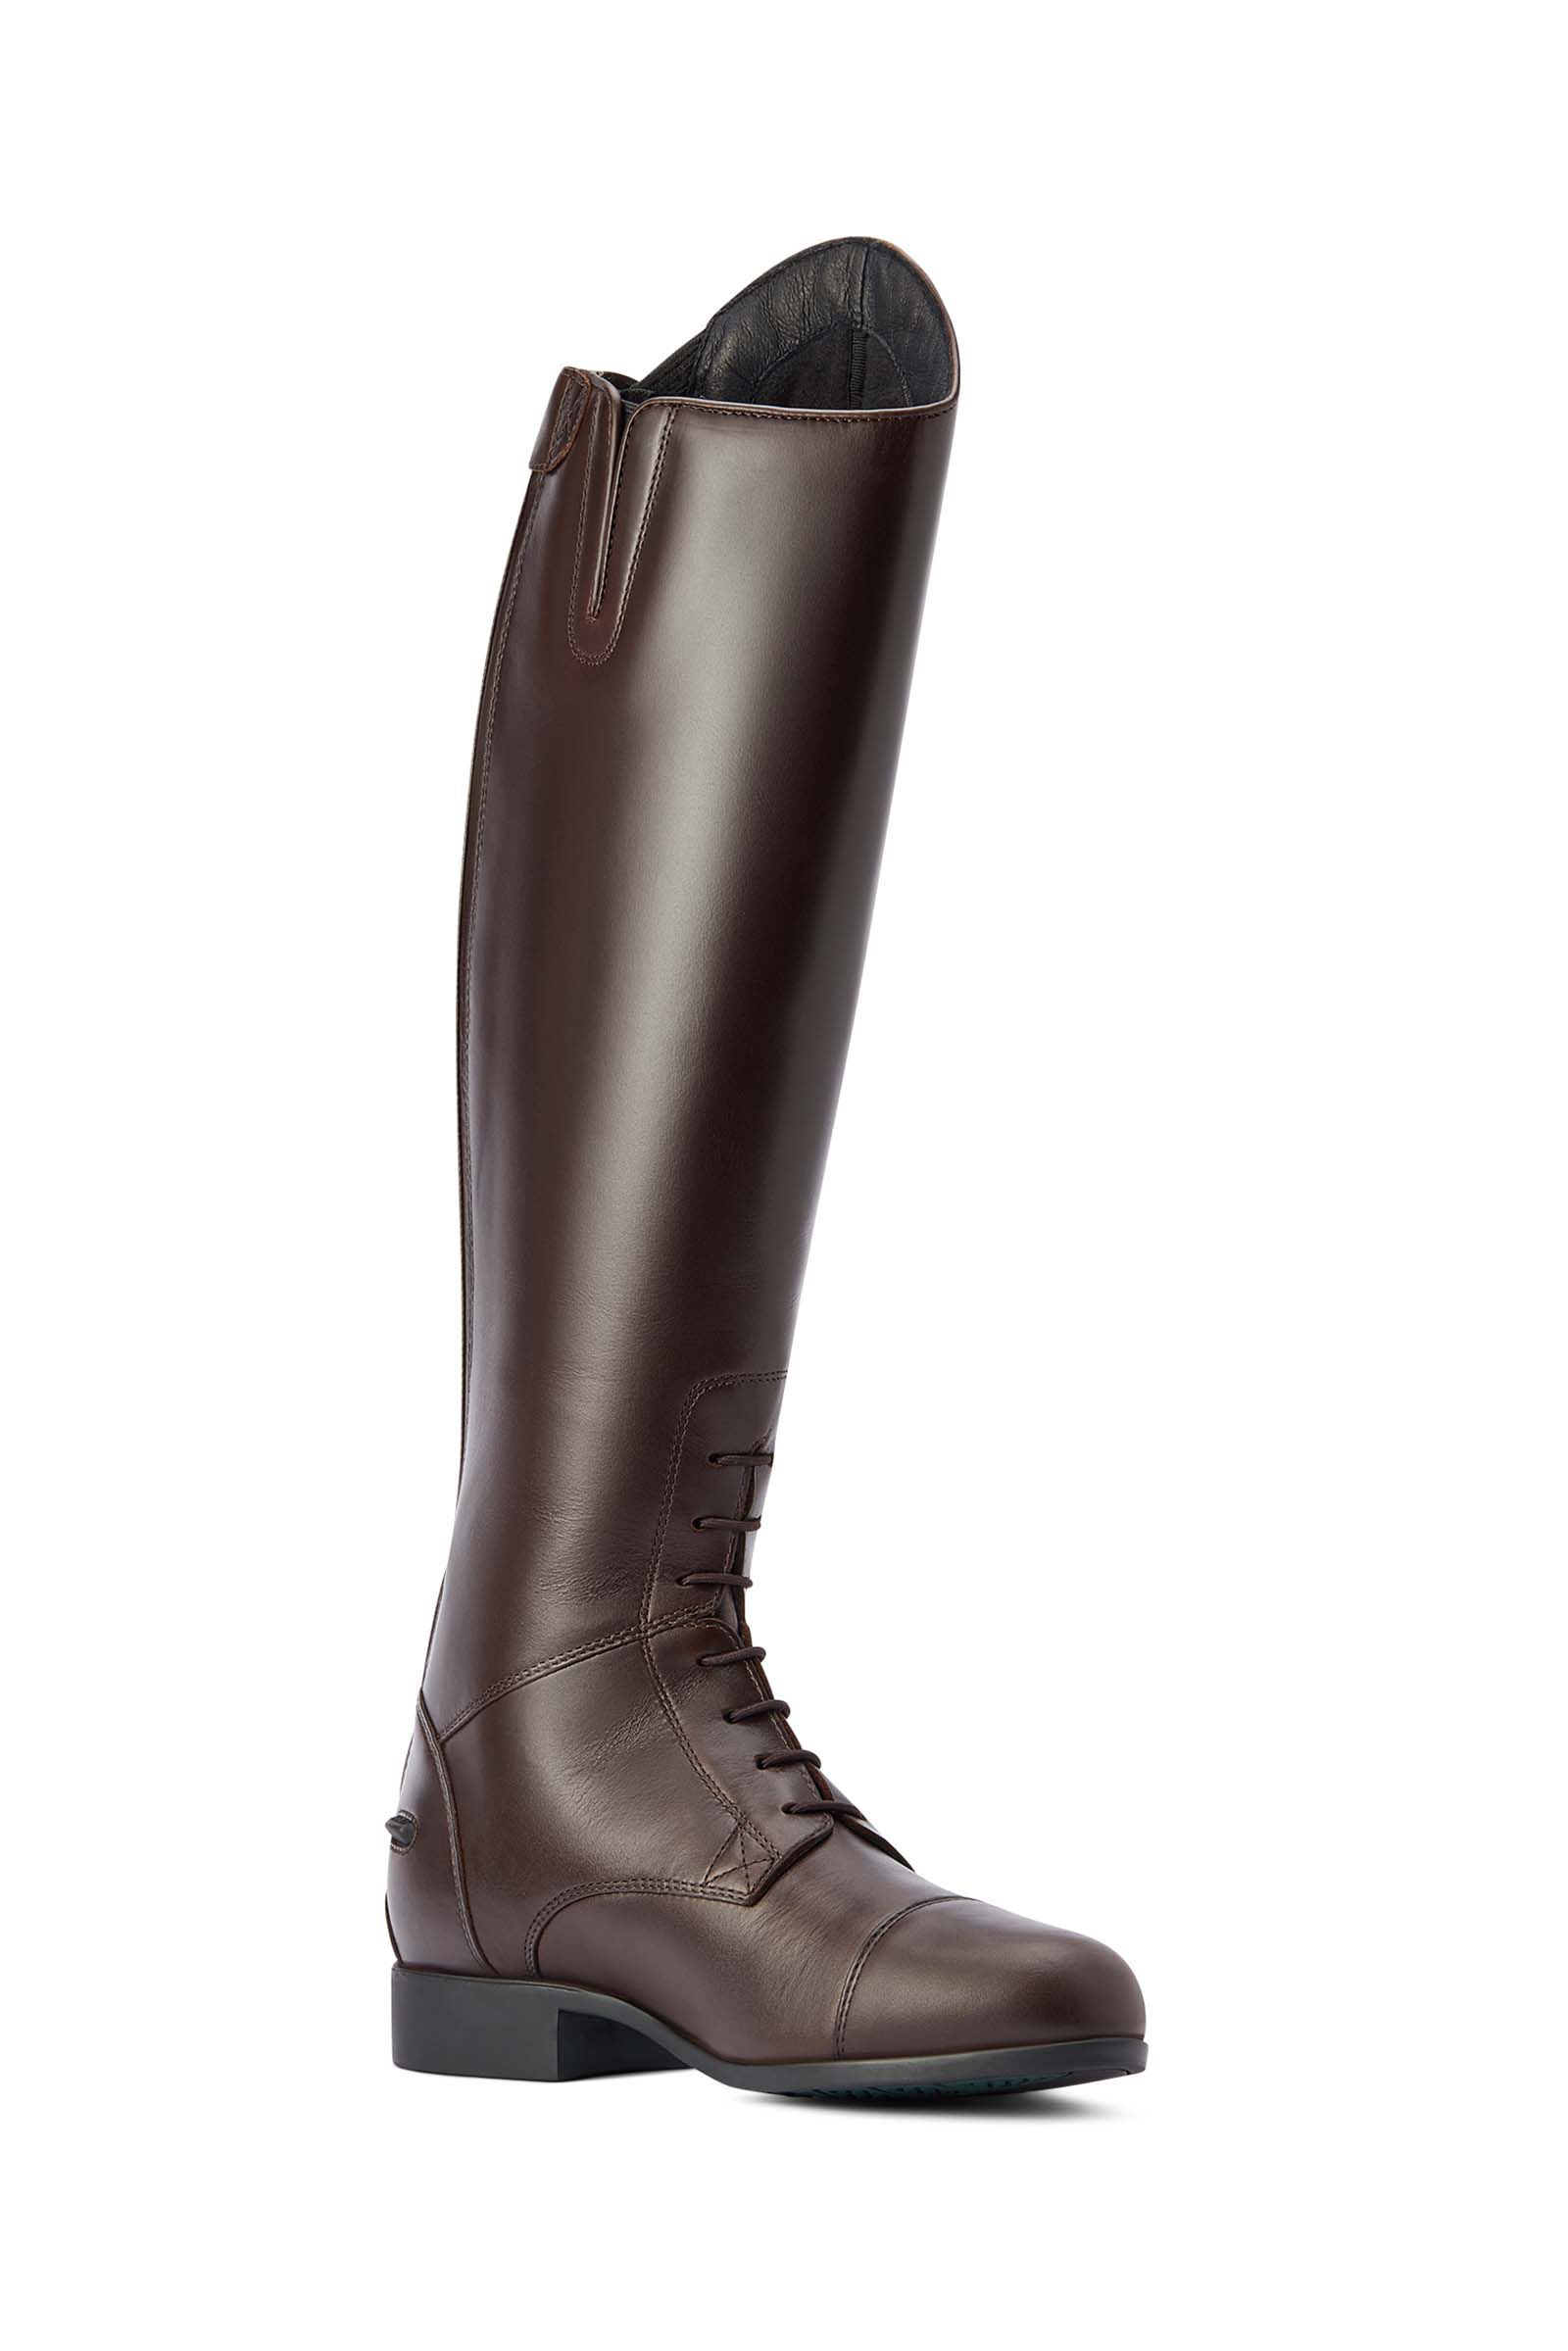 Buy Ariat Heritage Contour II H2O Insulated Women's Riding Boots